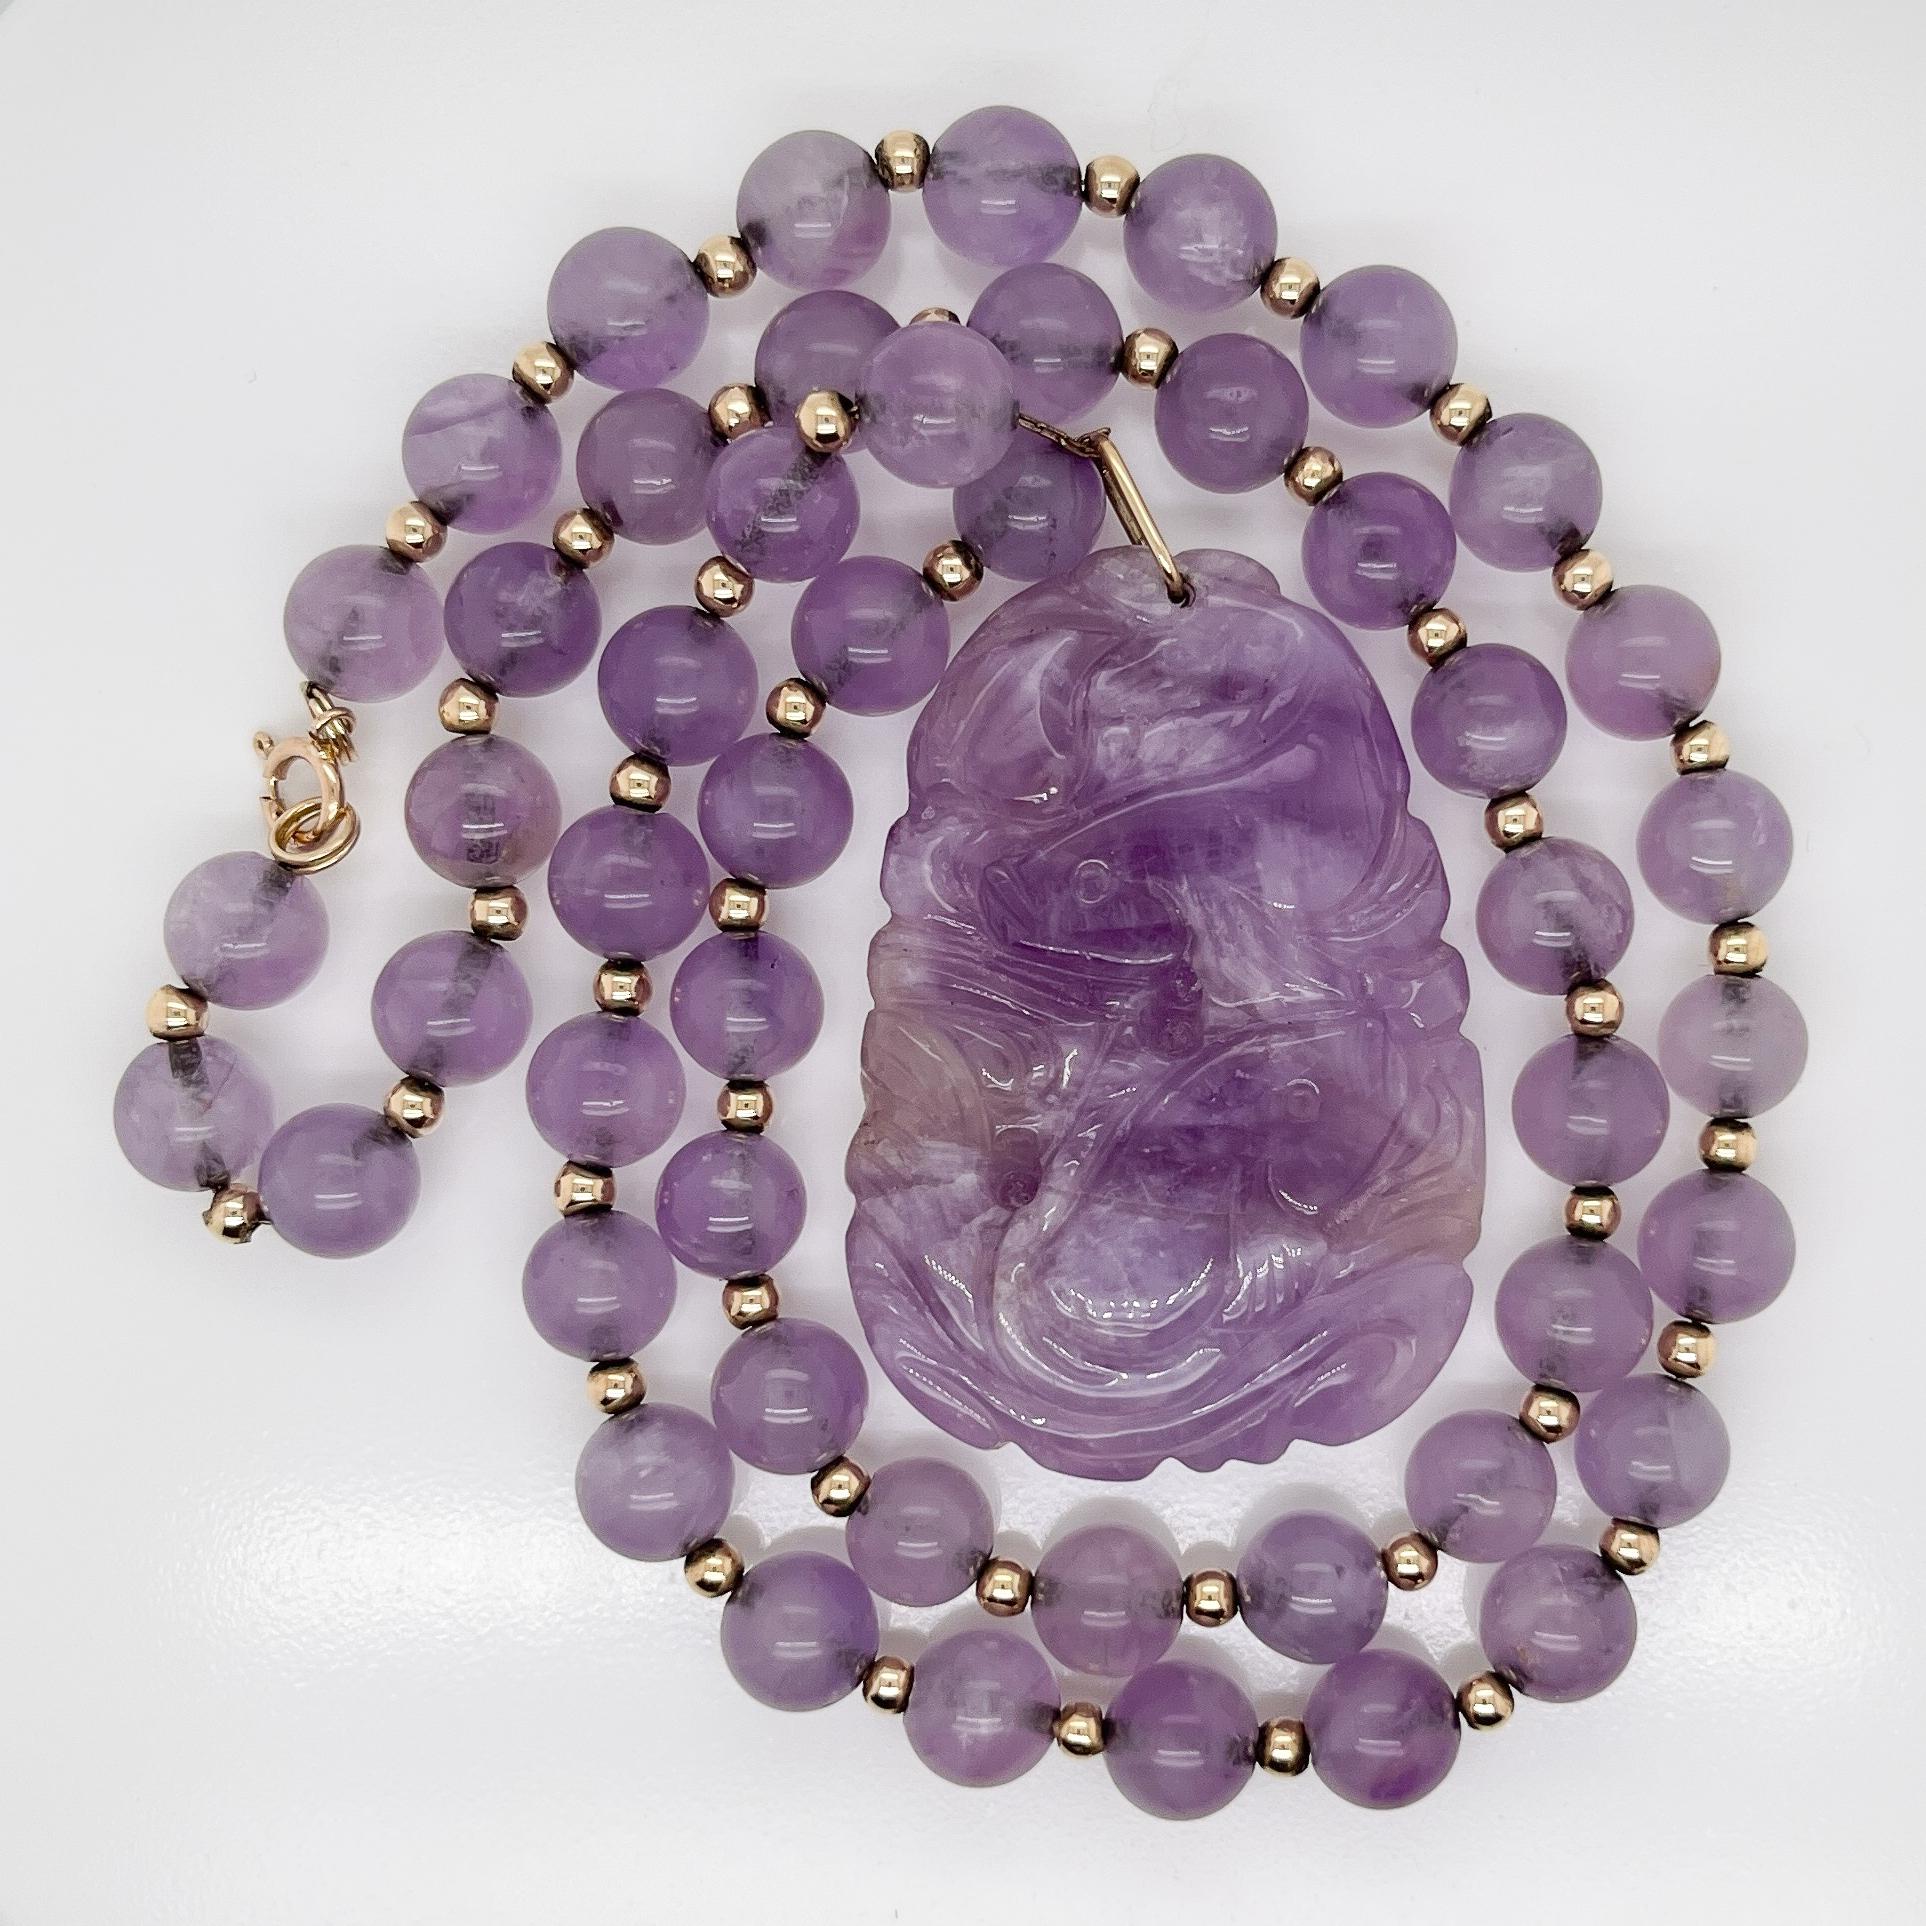 A very fine vintage Chinese 14k gold and purple jade pendant beaded necklace.

Comprising a large carved purple jade pendant and a beaded necklace.

The pendant has a depiction of koi fish on both sides. The necklace has alternating purple jade and